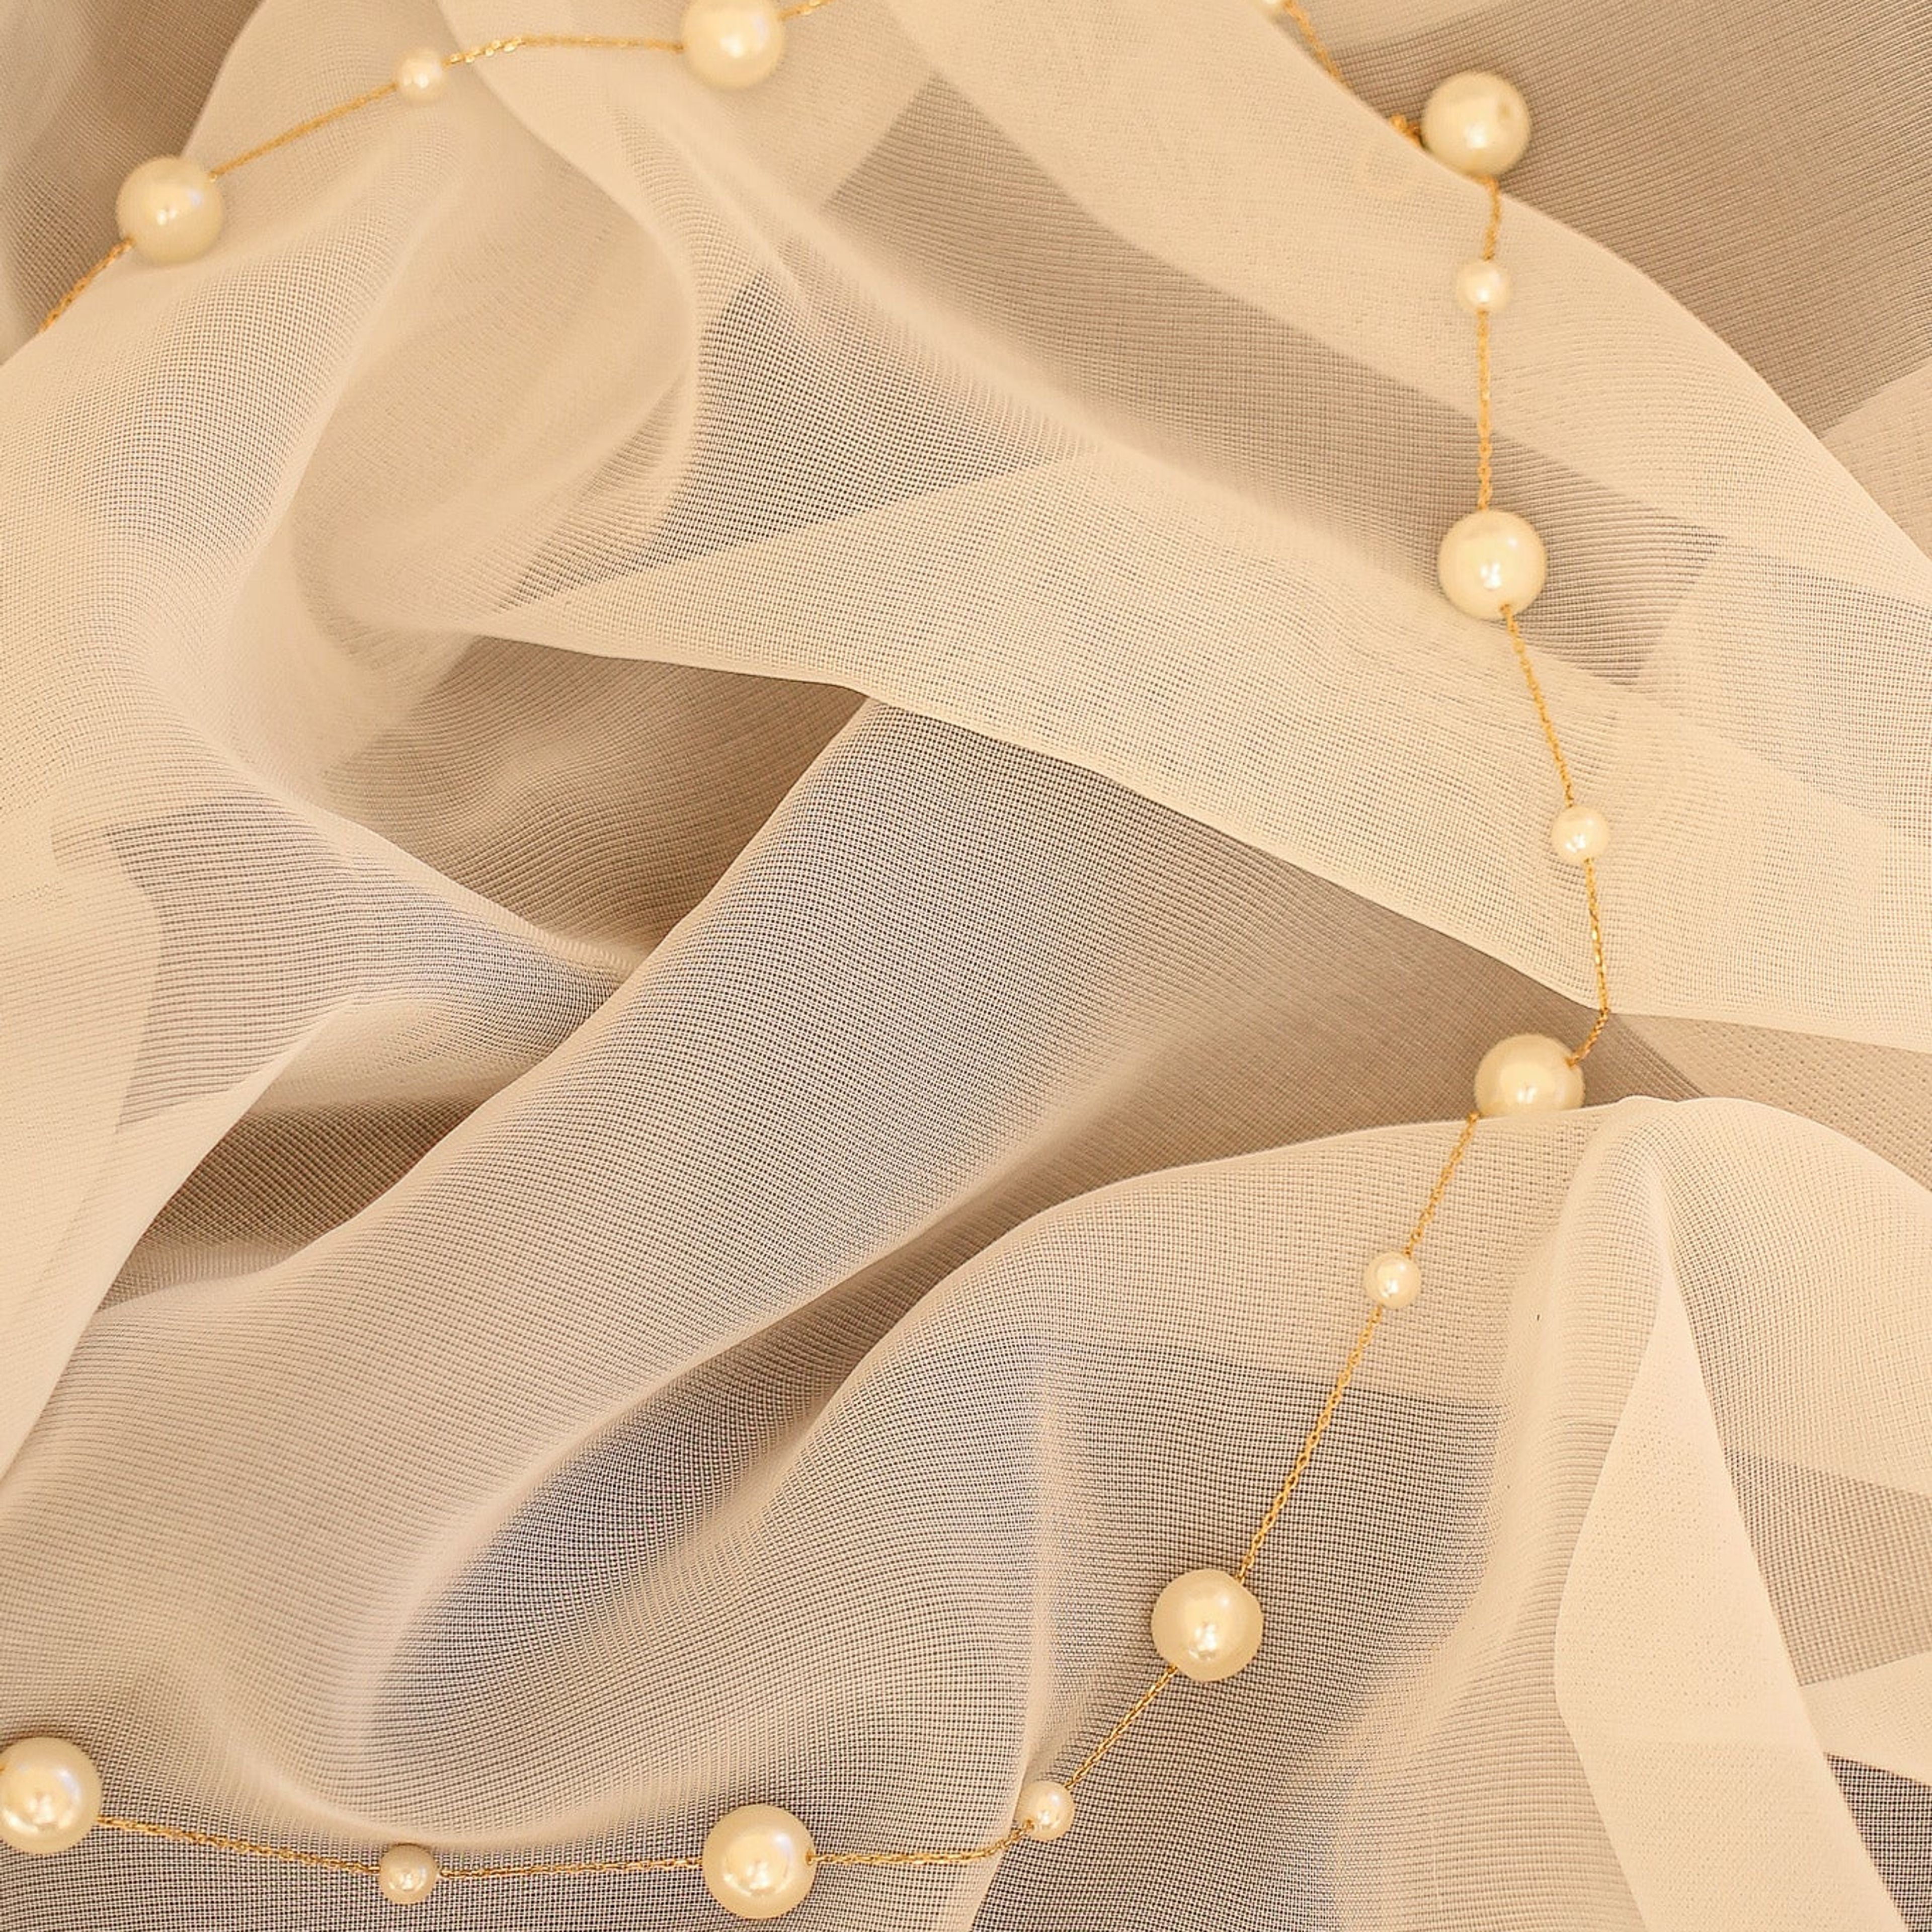 Sydney Convertible Necklace in Pearl